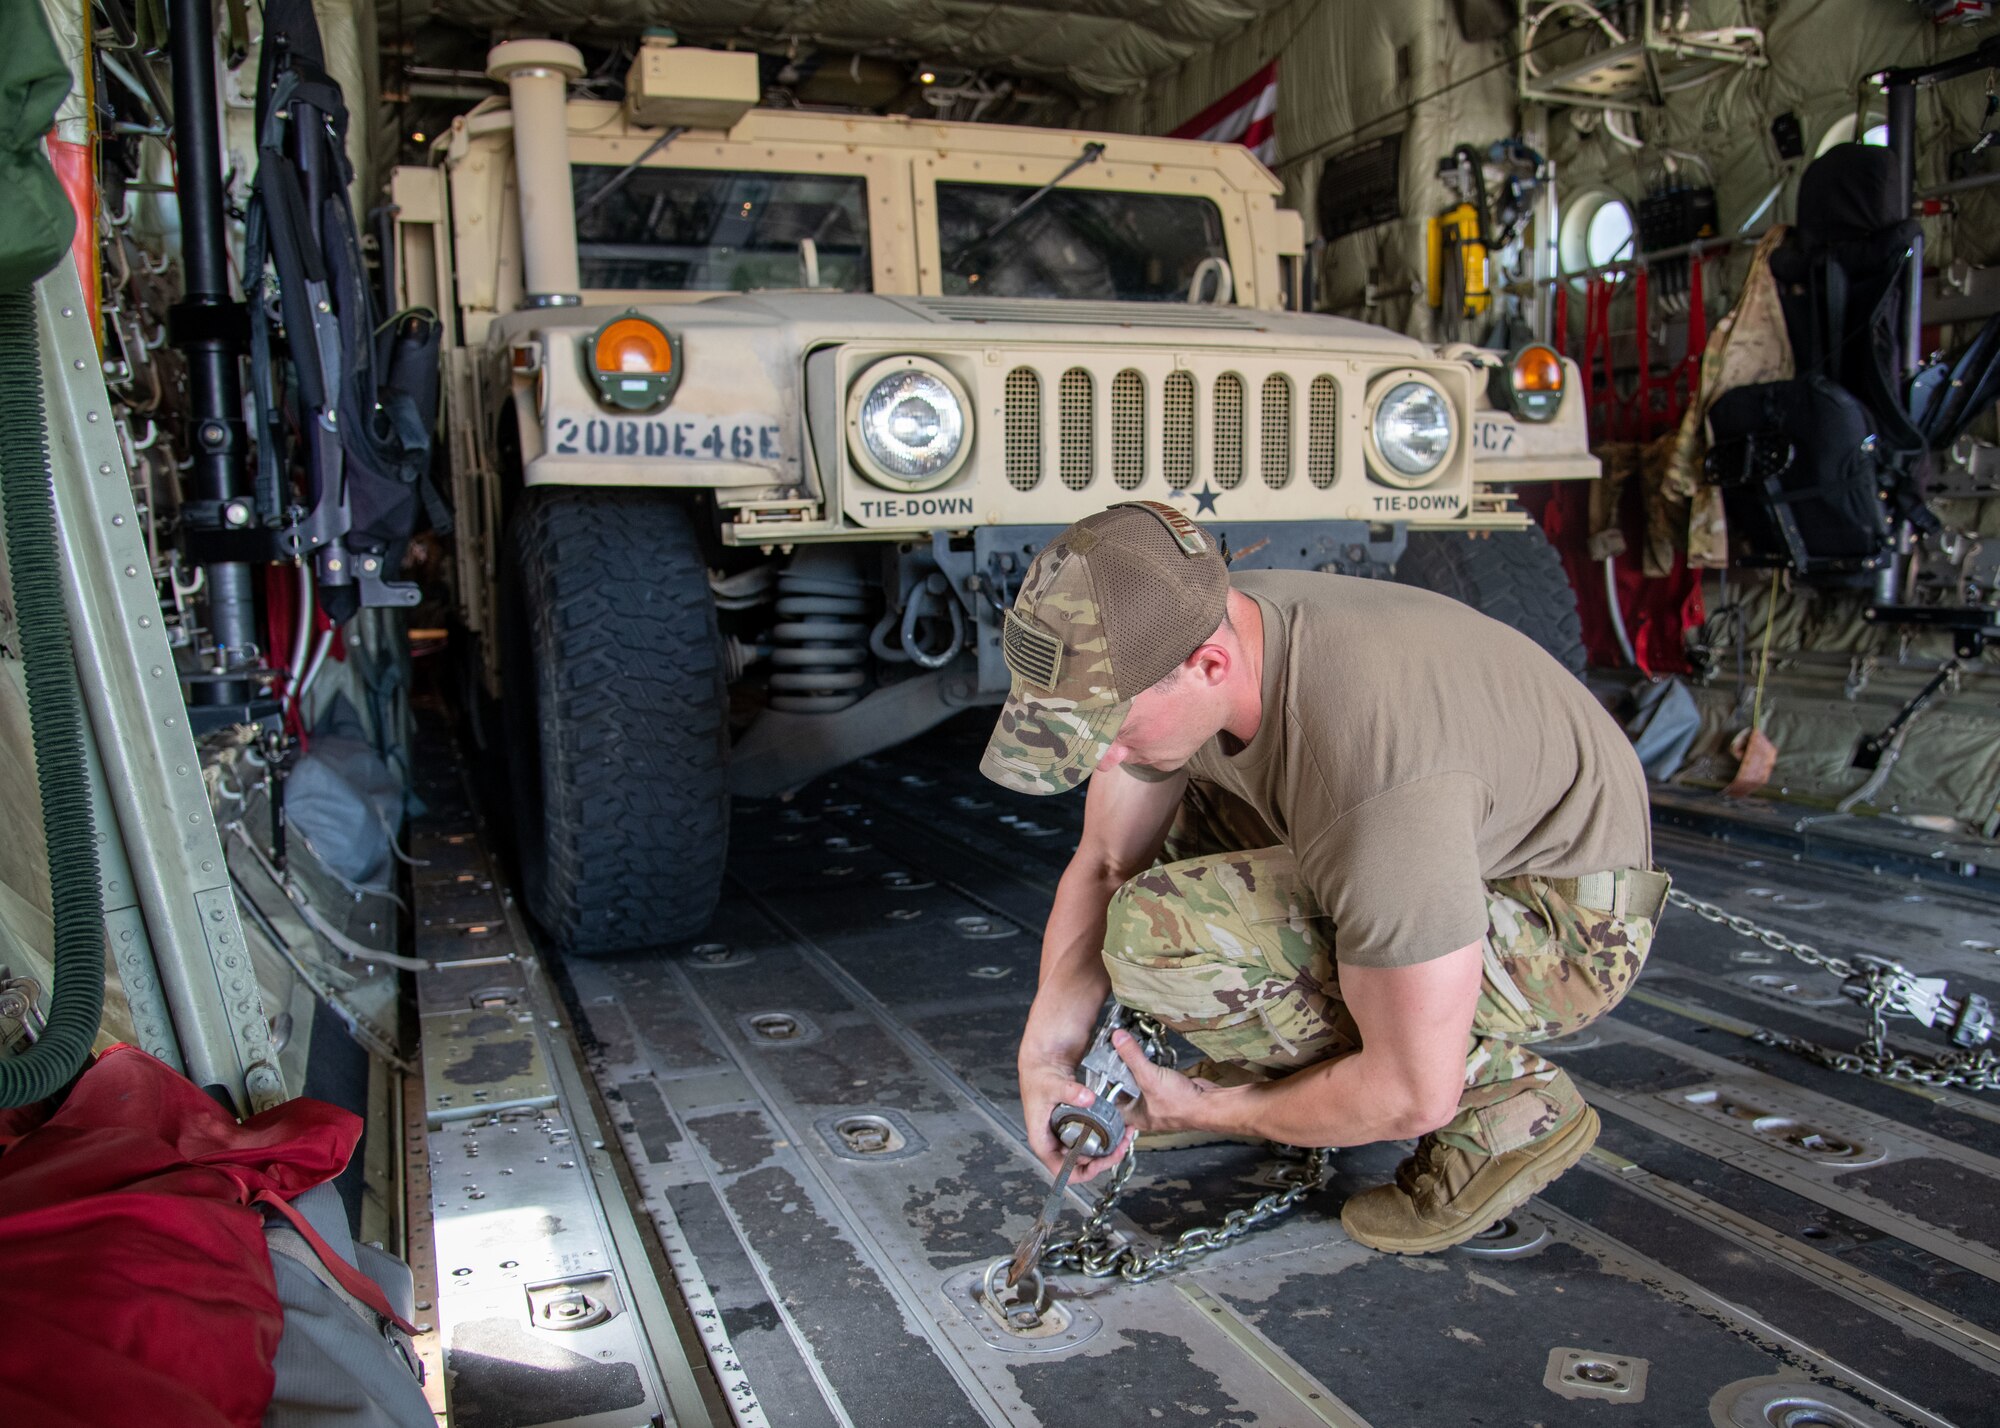 Tech. Sgt. Christopher Townsley, loadmaster for the 815th Airlift Squadron at Keesler Air Force Base, Miss., tightens chains to secure a High Mobility Multipurpose Wheeled Vehicle onto a C-130J Super Hercules during Voyager Shield, an exercise hosted by the 621st Air Mobility Advisory Group at the Joint Readiness Training Center and Fort Polk, La., May, 25, 2021. The joint forces exercise, Voyager Shield, consisted of the 621st AMAG, the Army JRTC and Fort Polk and the Air Force Reserve from the 403rd Wing, took place from May 25-27 and for the 815th AS required tactical training consisted of loading and offloading of rolling cargo and personnel air drops. (U.S. Air Force by Staff Sgt. Kristen Pittman)